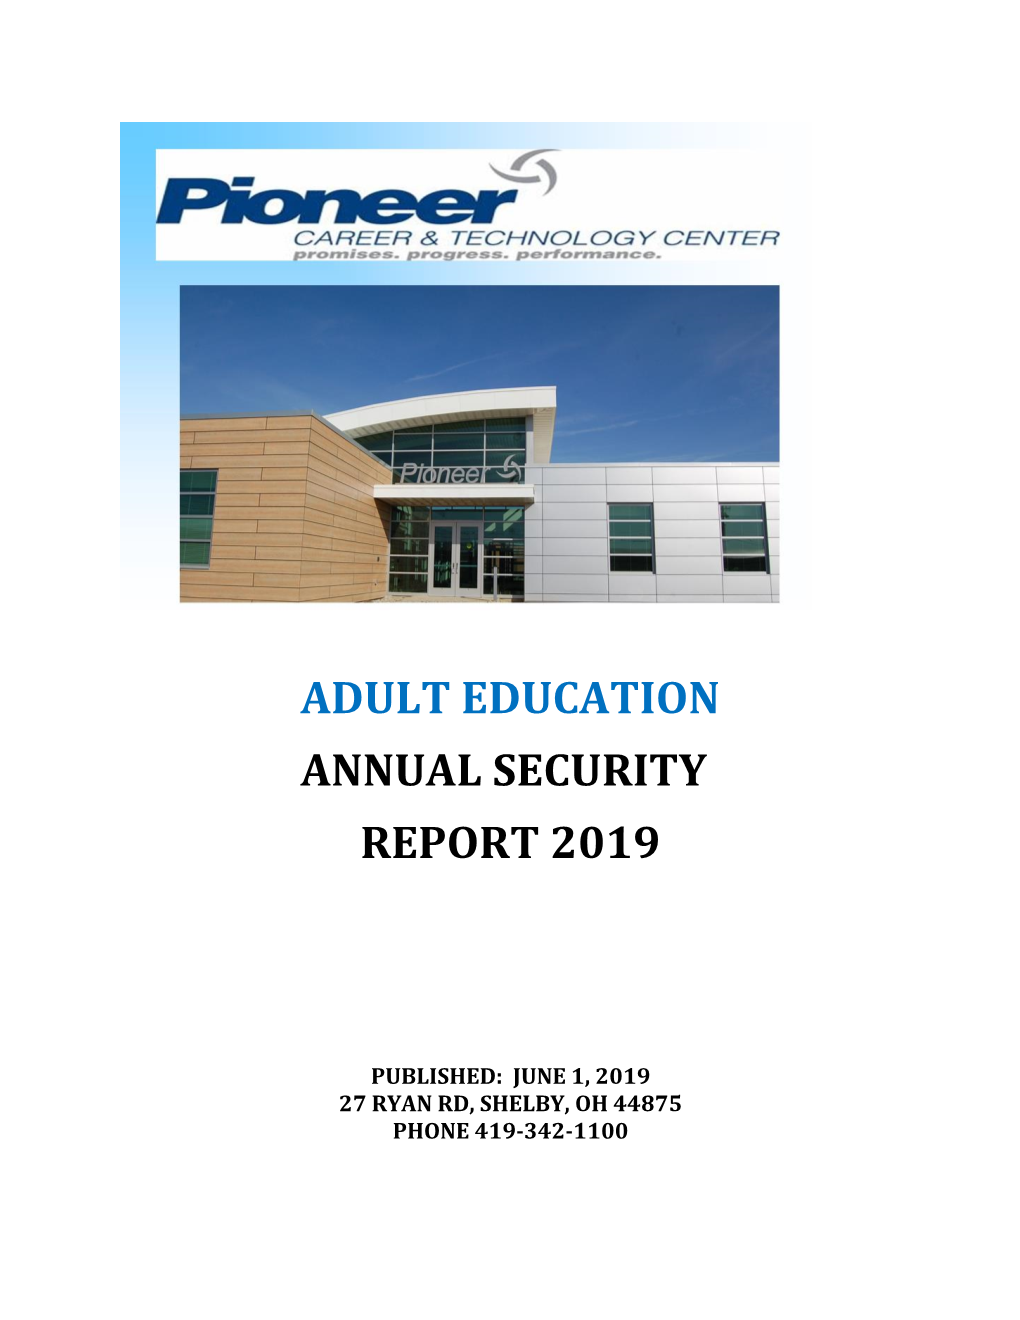 Adult Education Annual Security Report 2019